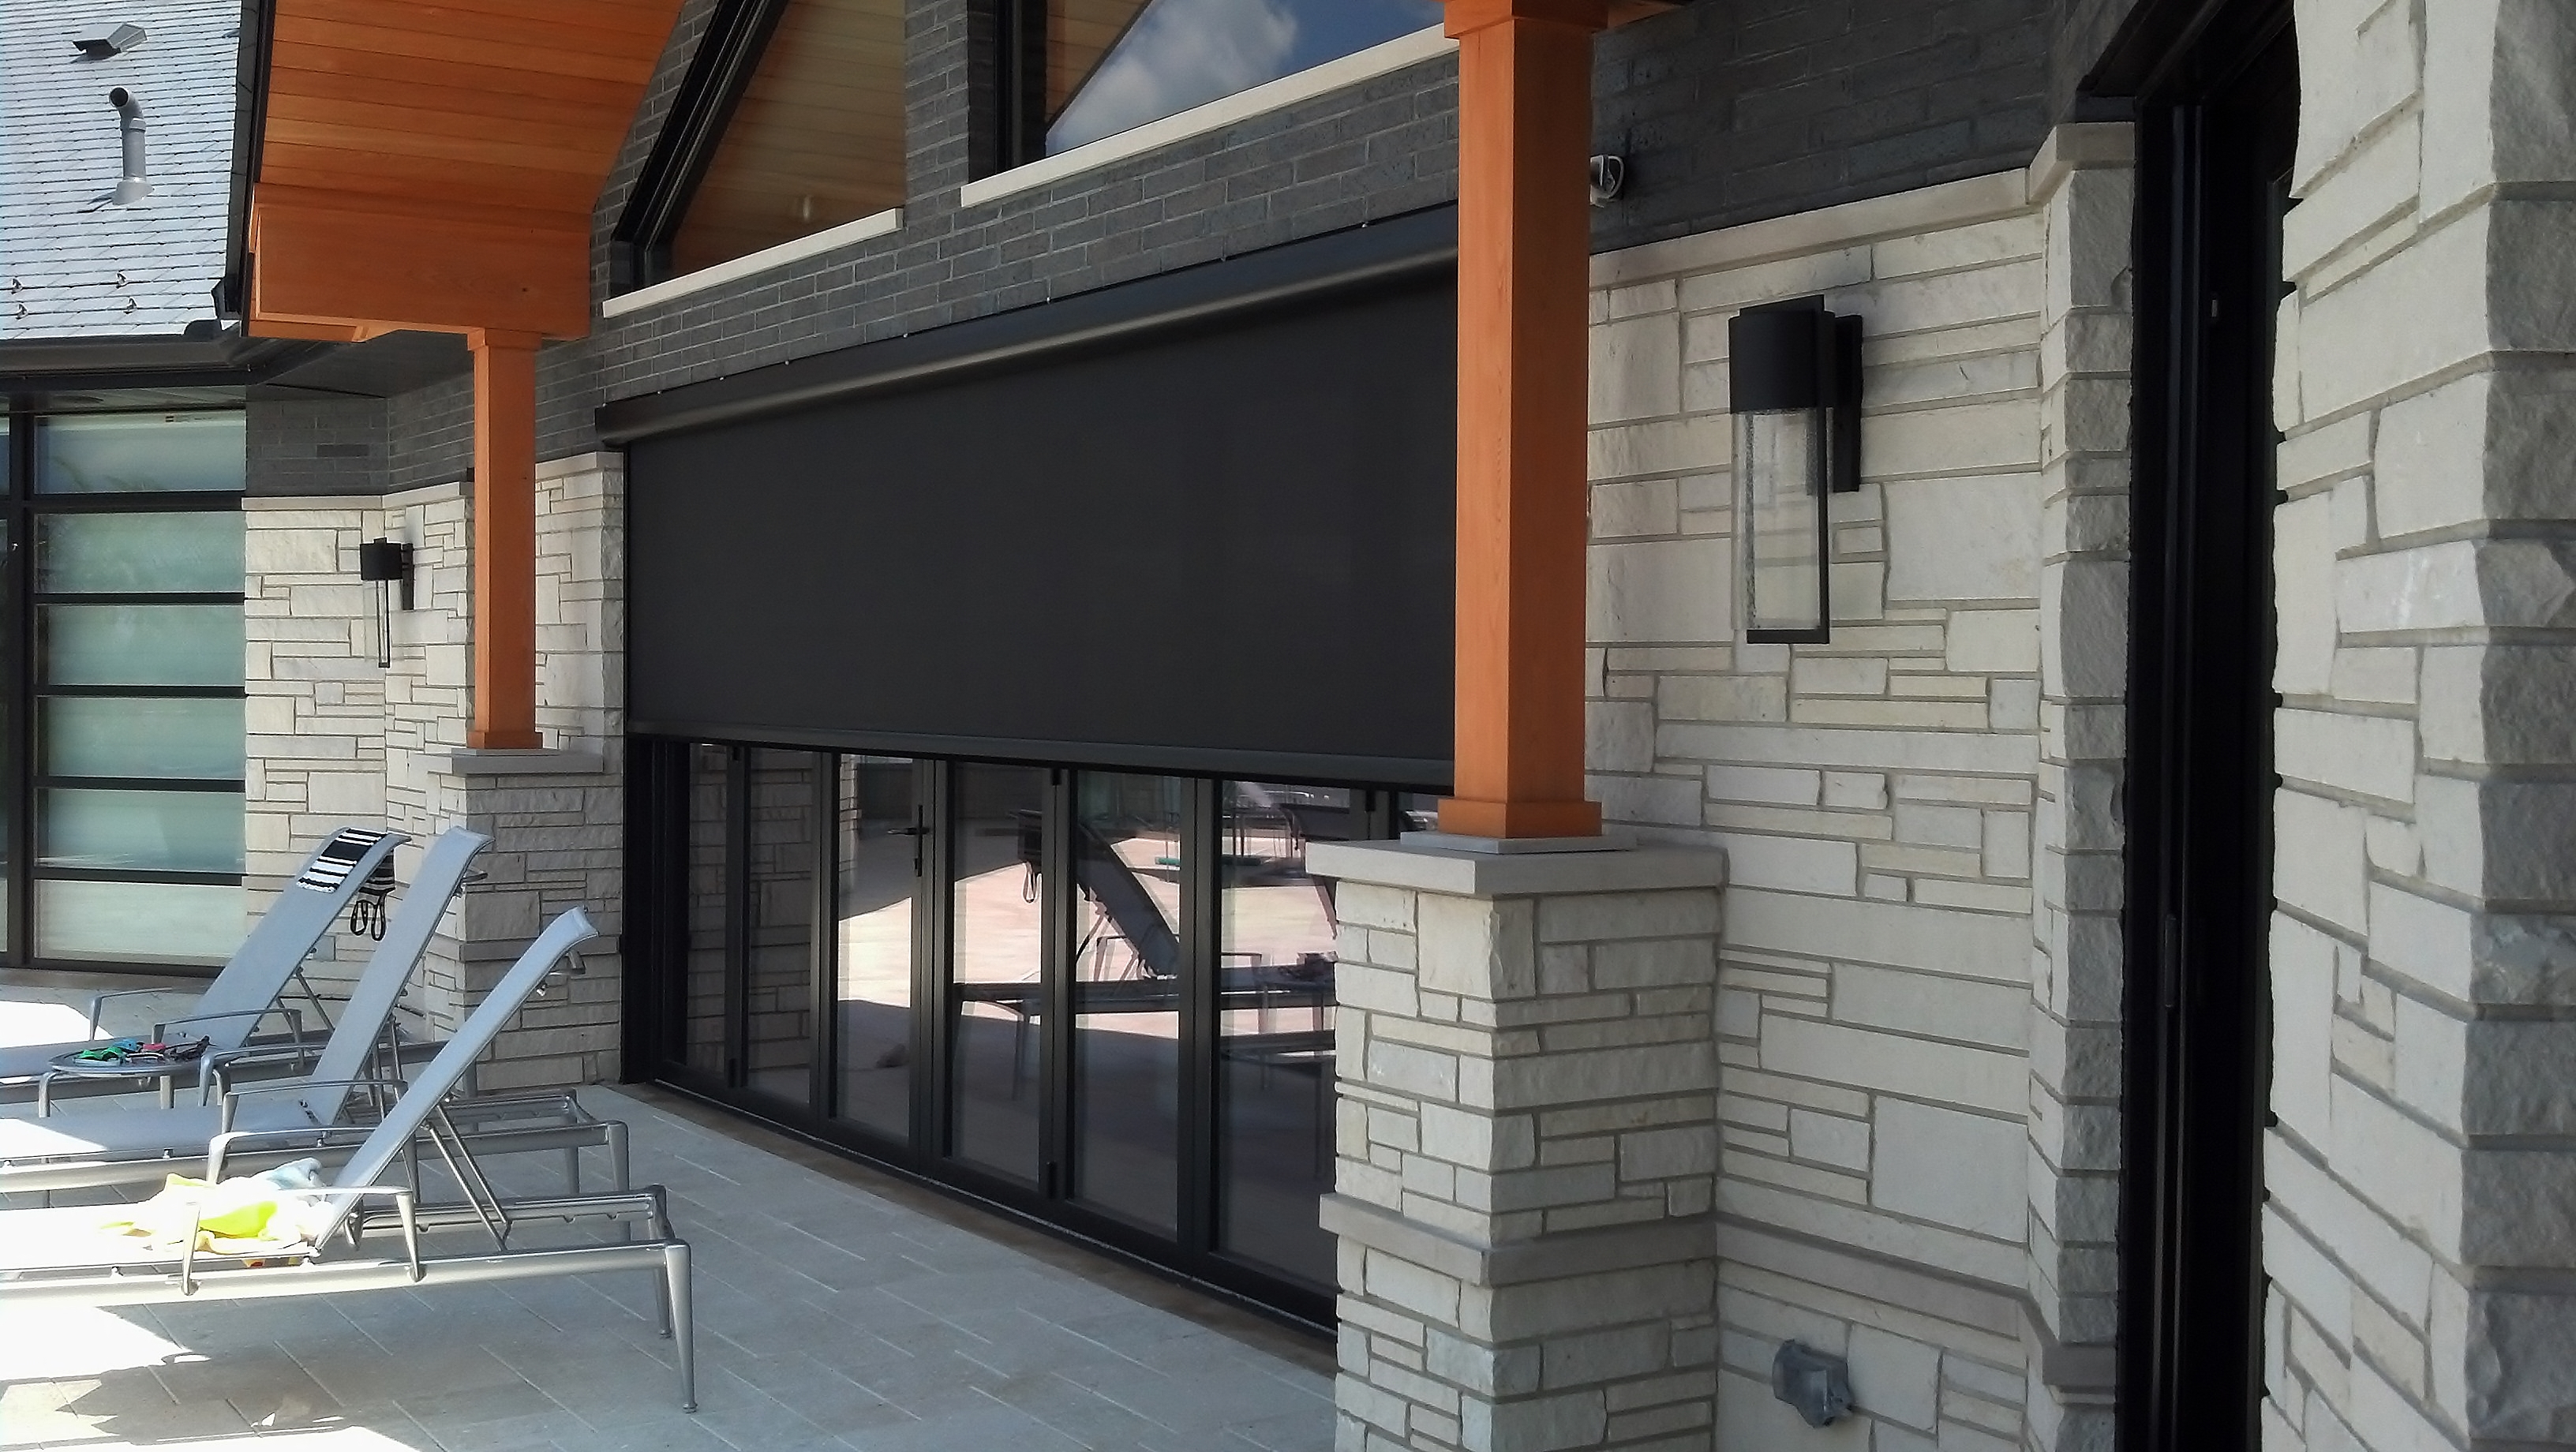 Motorized Retractable Screens For, How Much Do Electric Patio Screens Cost